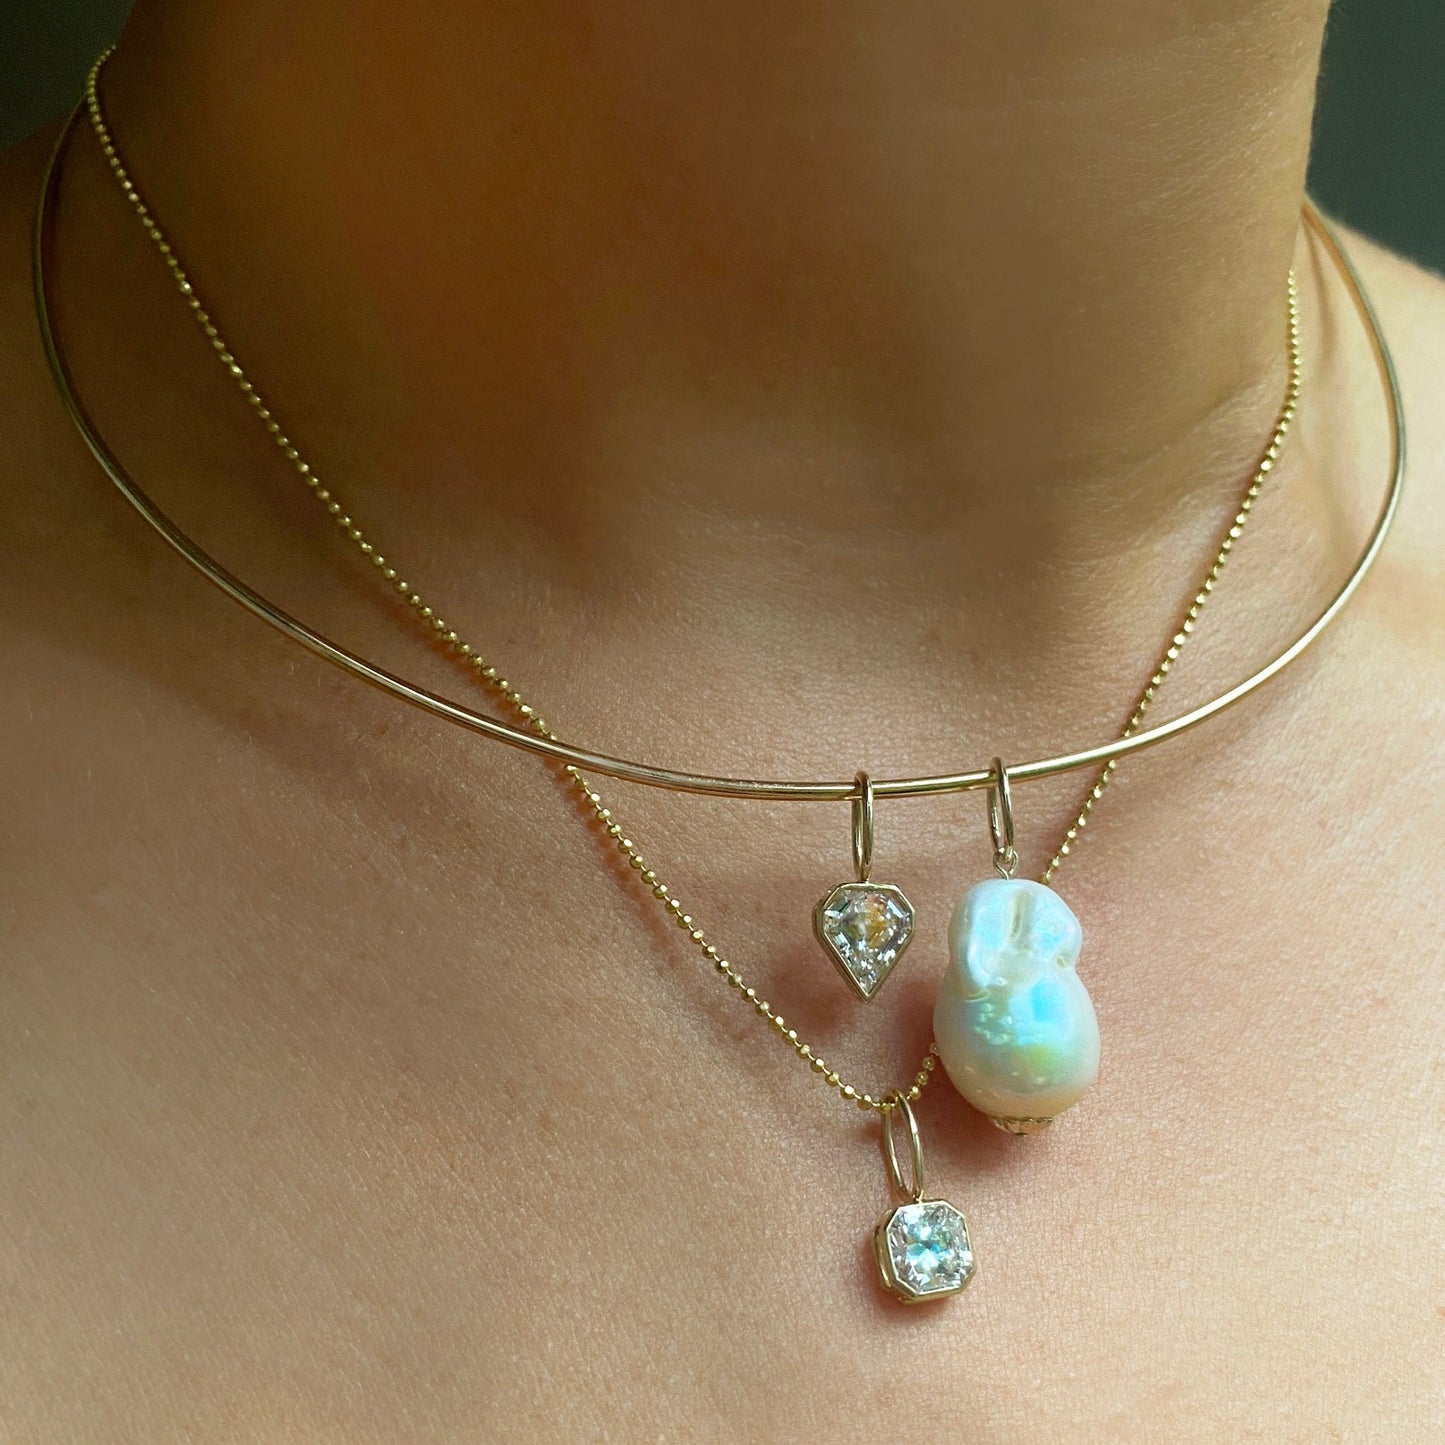 Baroque Pearl Charm. Styled on a neck with a solitaire hanging from a wire choker necklace